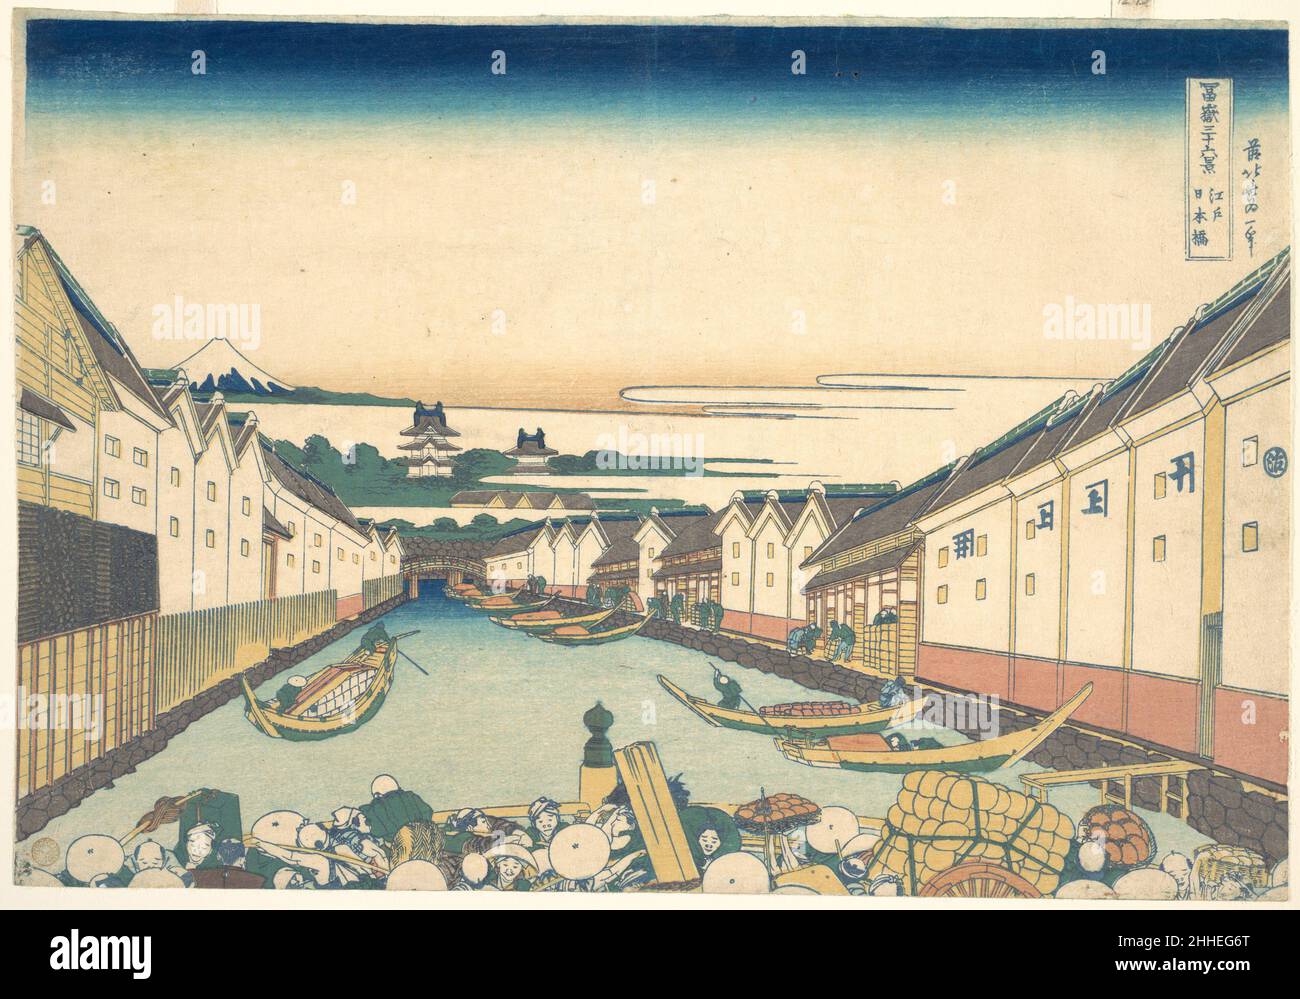 Nihonbashi in Edo (Edo Nihonbashi), from the series Thirty-six Views of Mount Fuji (Fugaku sanjūrokkei) ca. 1830–32 Katsushika Hokusai Japanese Views of the central district of old Edo such as this are frequently characterized by three motifs: the arc of Nihonbashi (literally, 'Bridge of Japan') together with the tiered roofs of Edo Castle and the distant Mt. Fuji. In addition to being the first stage of the Tōkaidō, Nihonbashi's distinctive form and prominent location earned it the importance of a symbol of the capital city.In this composition, Hokusai's radical cropping of the foreground bri Stock Photo